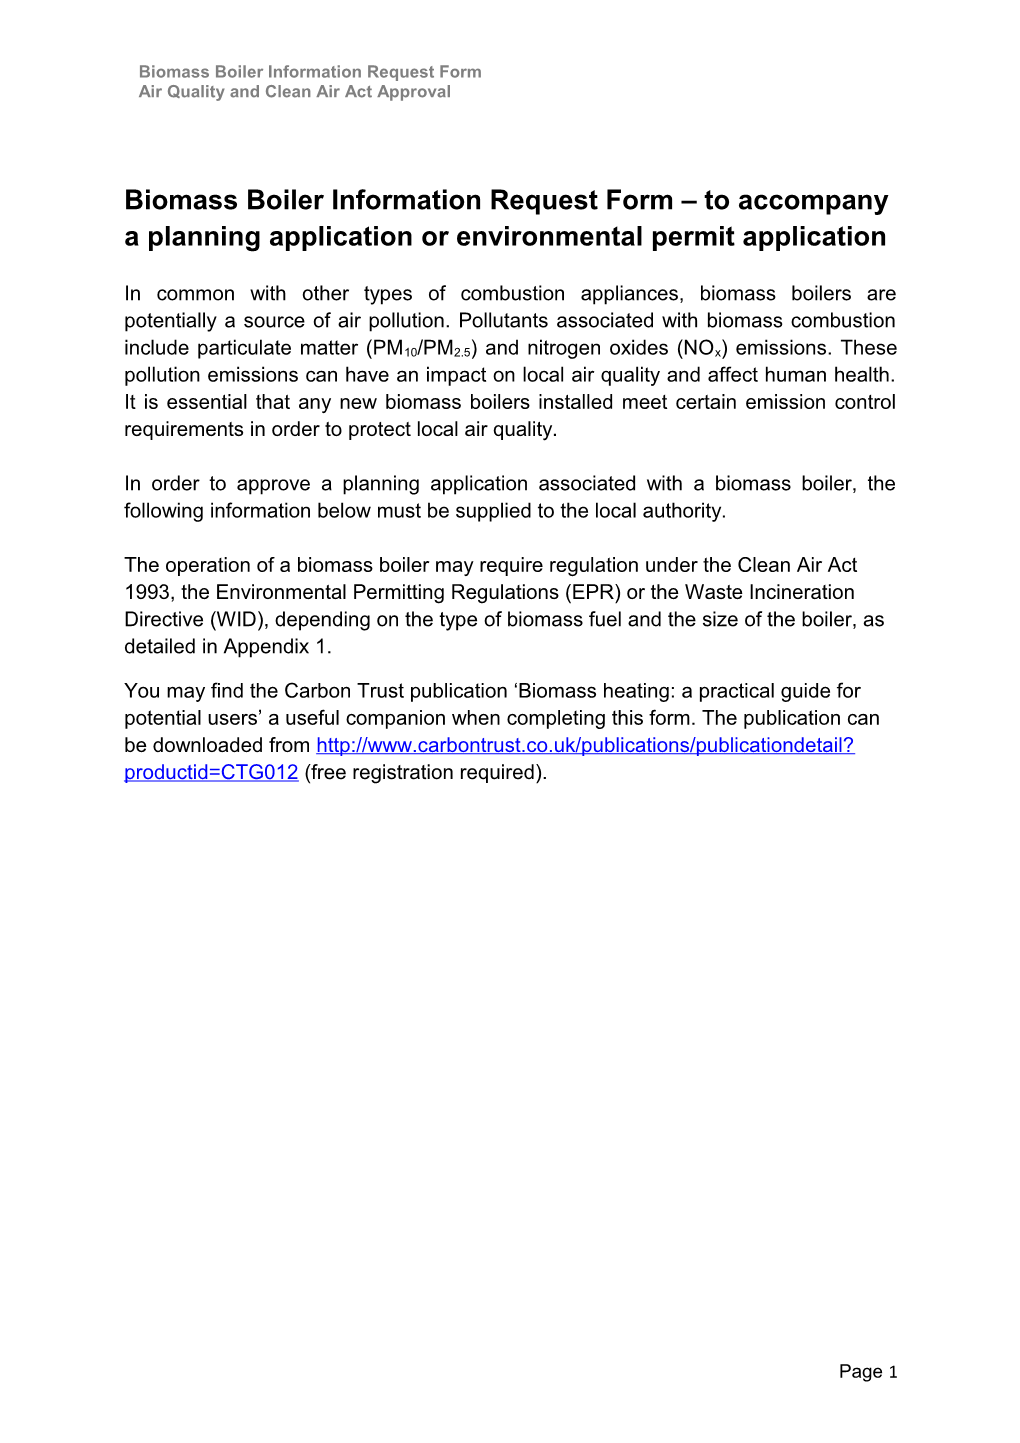 Biomass Boiler Information Request Form to Accompany a Planning Application Or Environmental